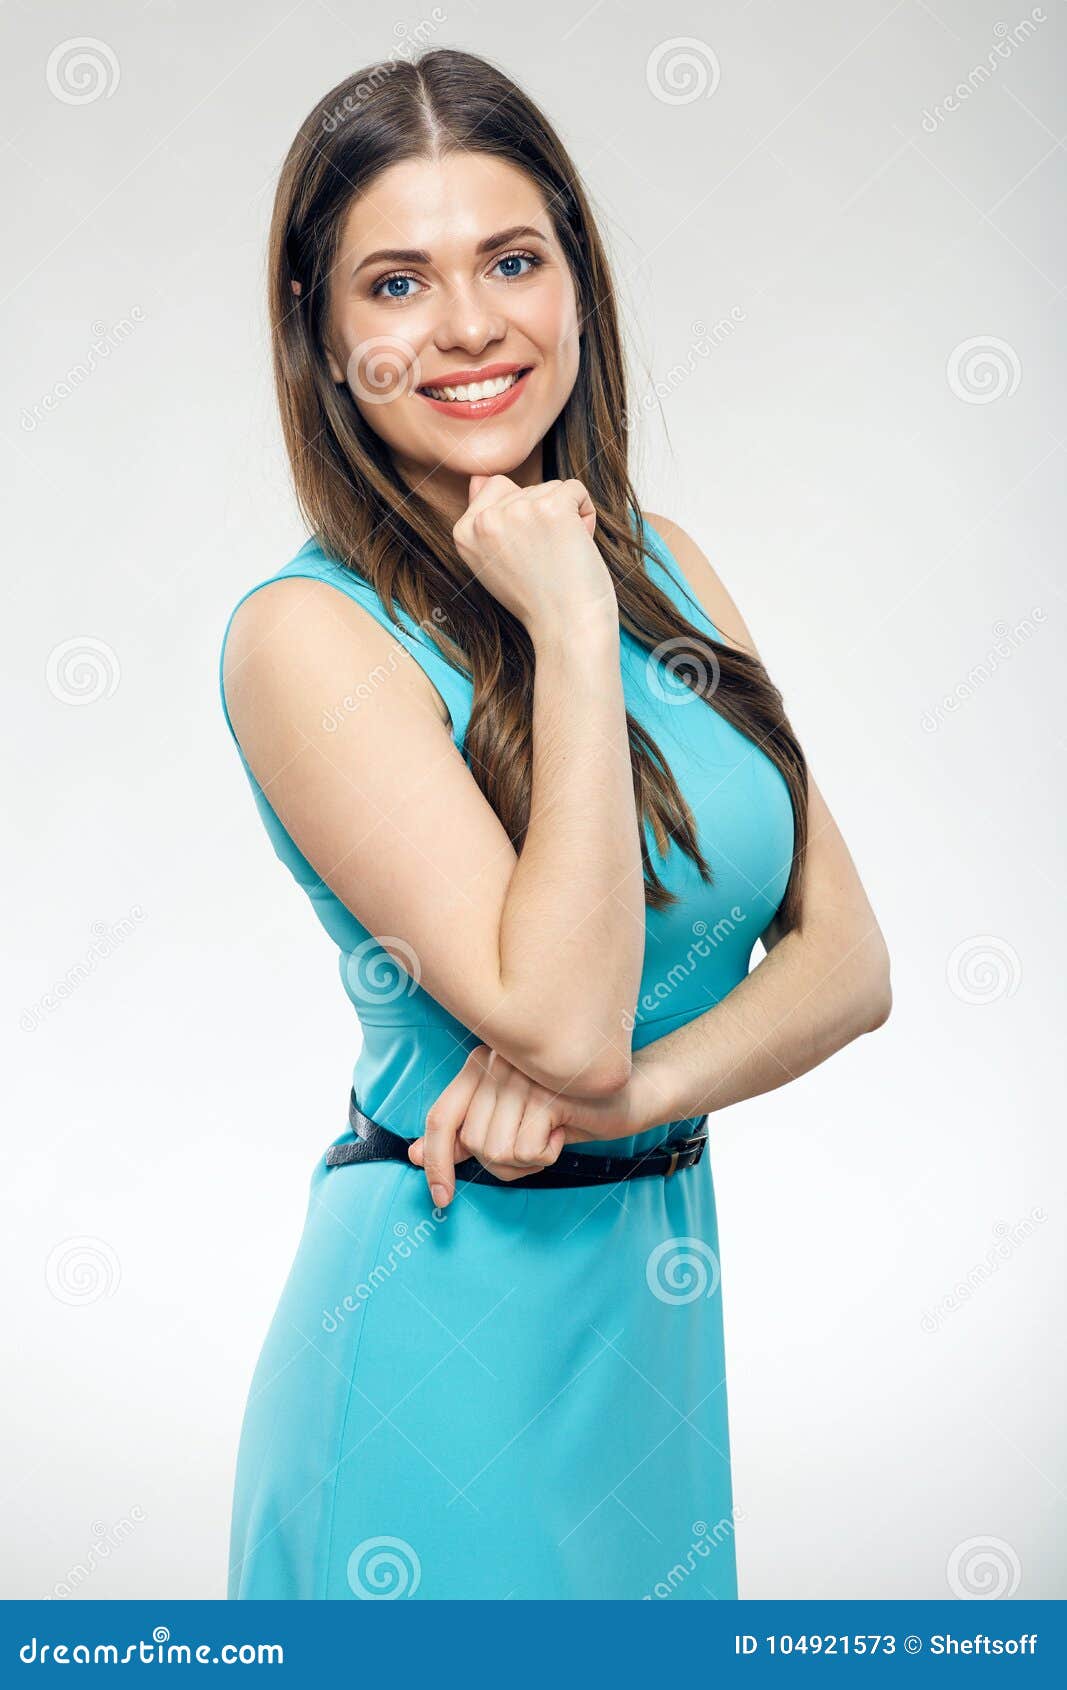 Beautiful Woman with Crossed Arms in Blue Dress. Stock Image - Image of ...